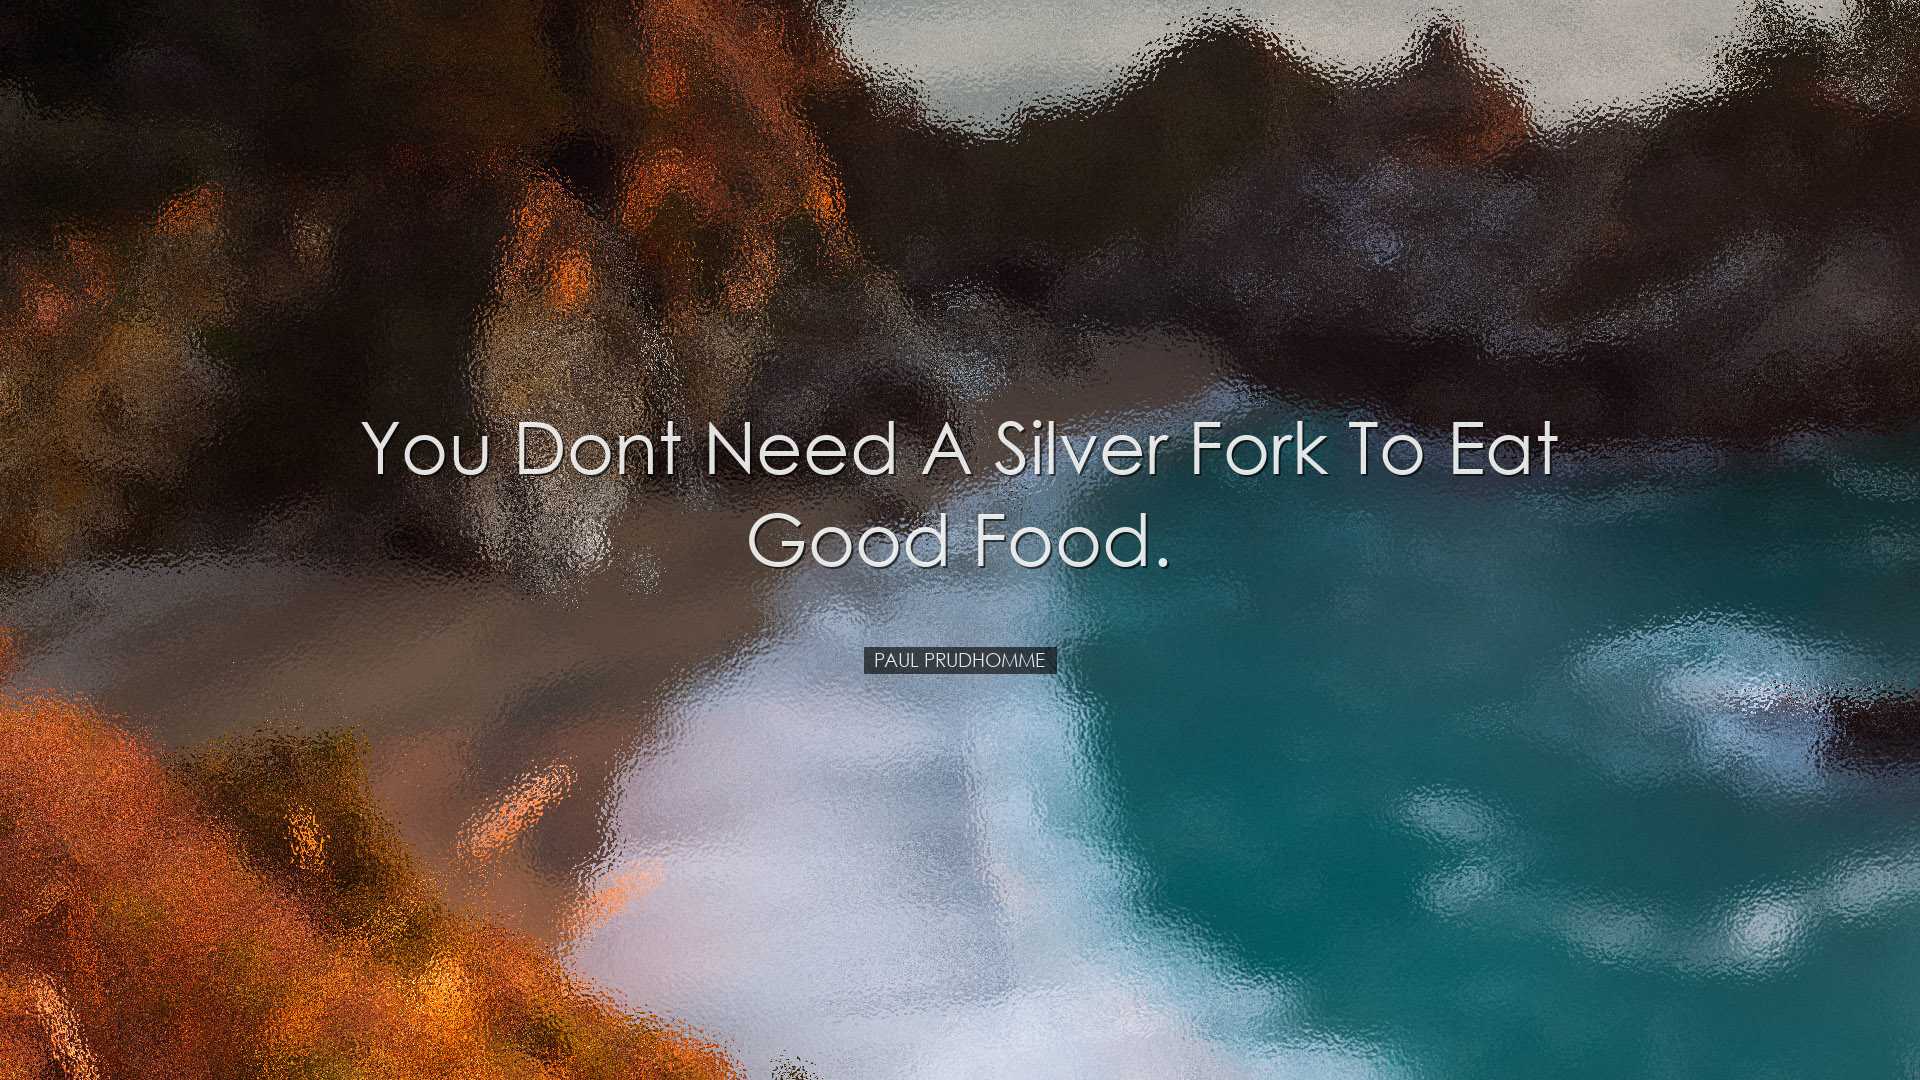 You dont need a silver fork to eat good food. - Paul Prudhomme